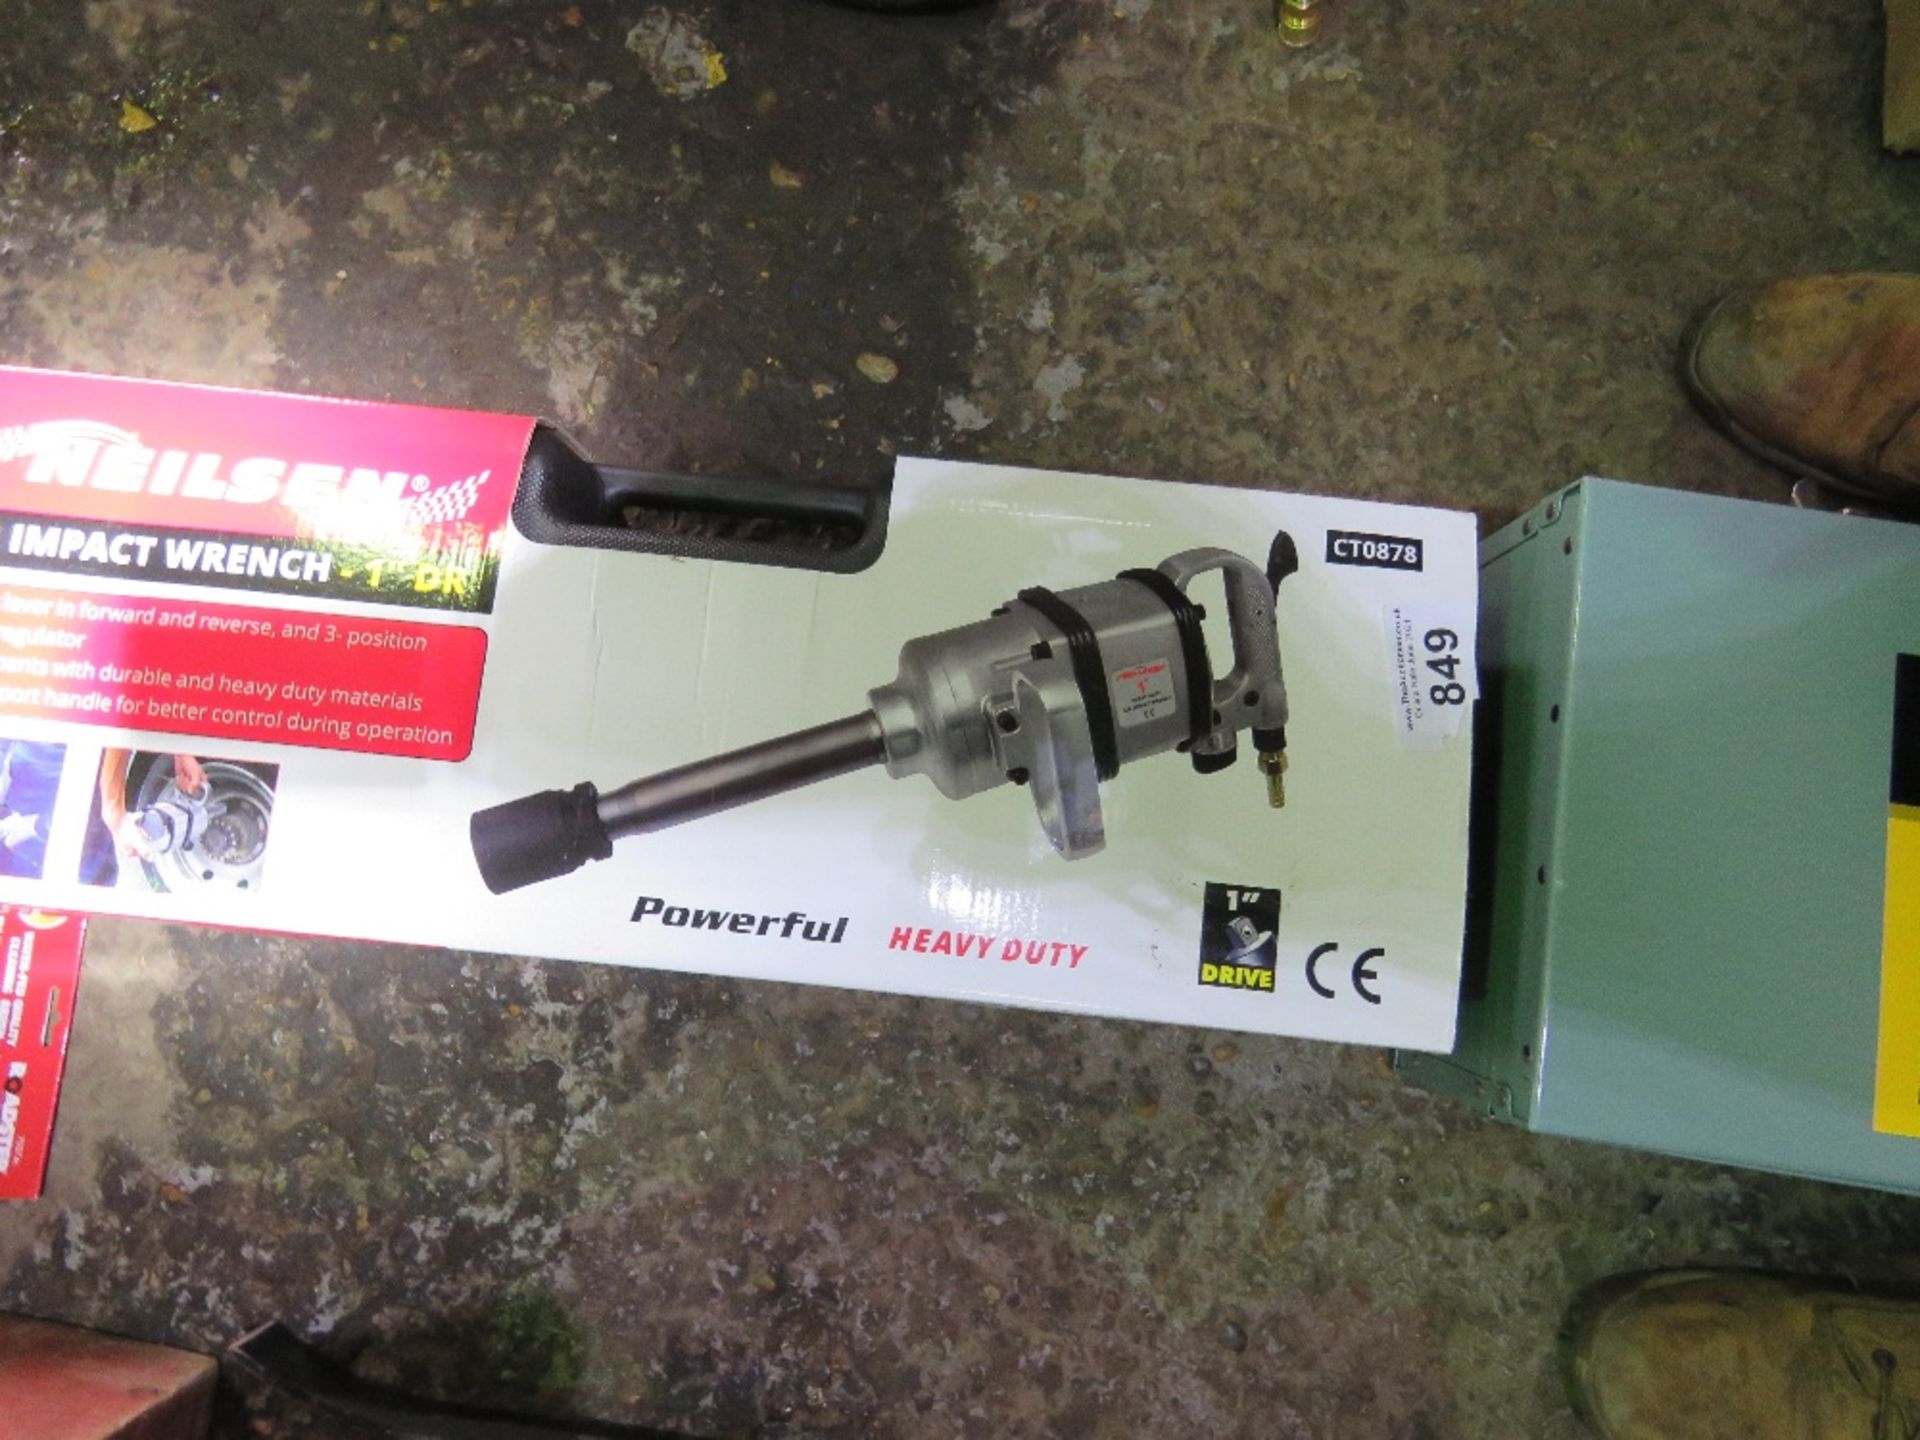 1" AIR IMPACT WRENCH IN BOX.